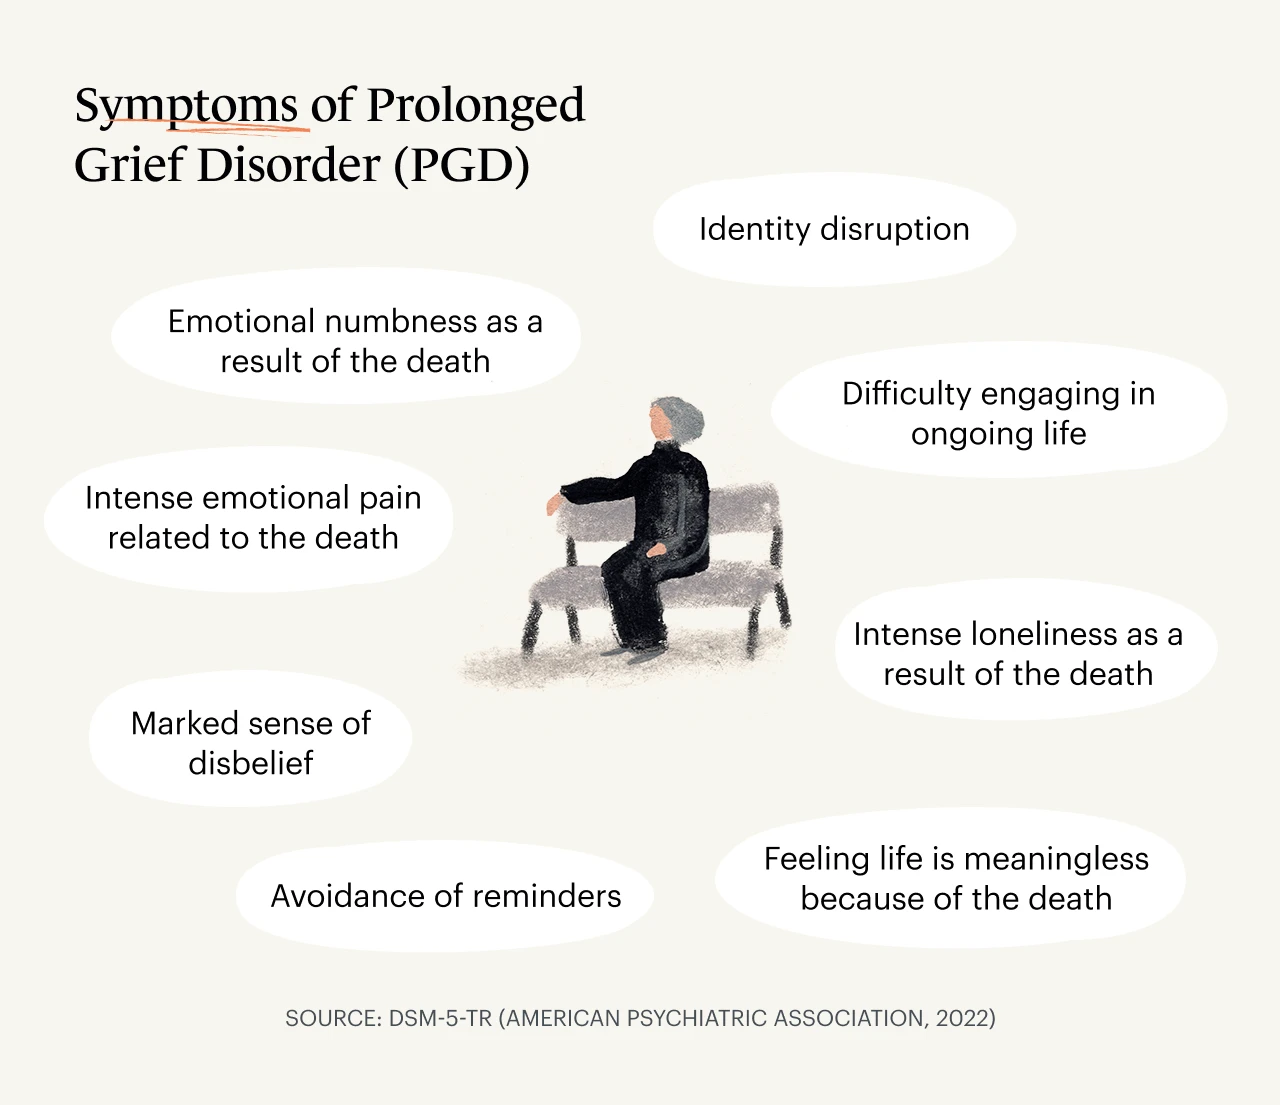 A Monarch original infographic showing the prolonged grief disorder symptoms (PGD) as described in the DSM-5-TR (American Psychiatric Association, 2022)